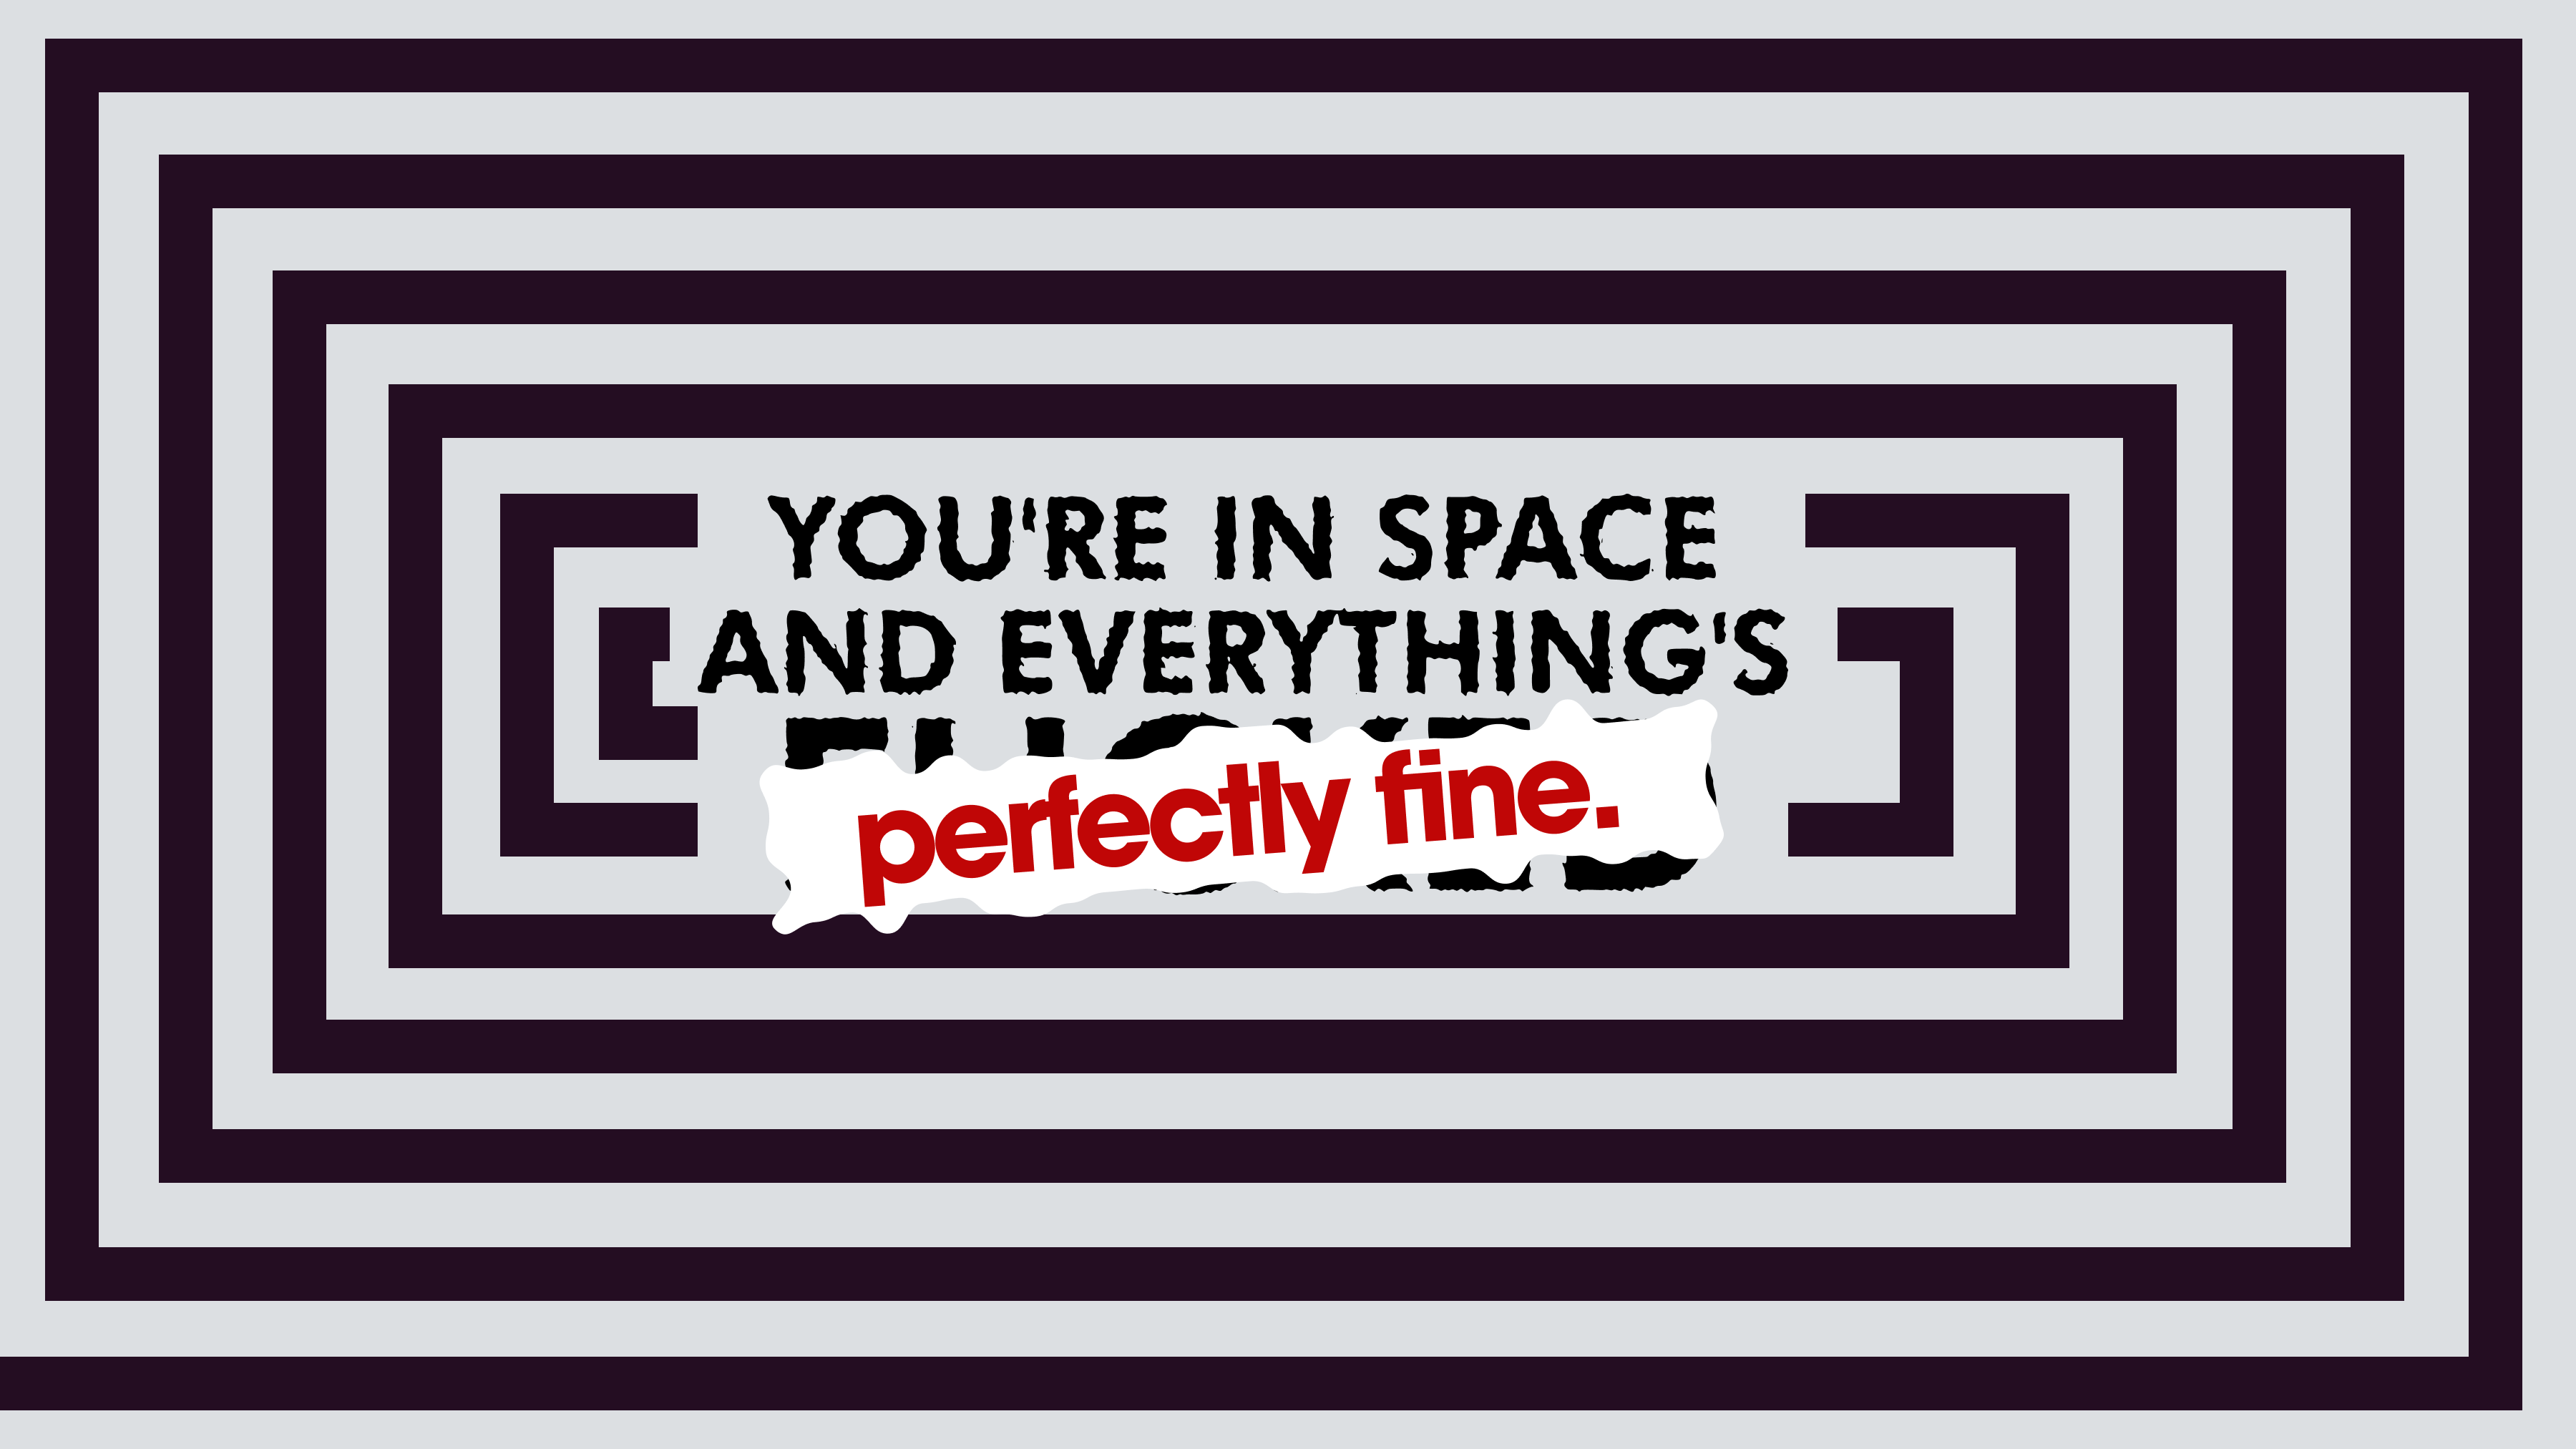 You're In Space and Everything's Perfectly Fine